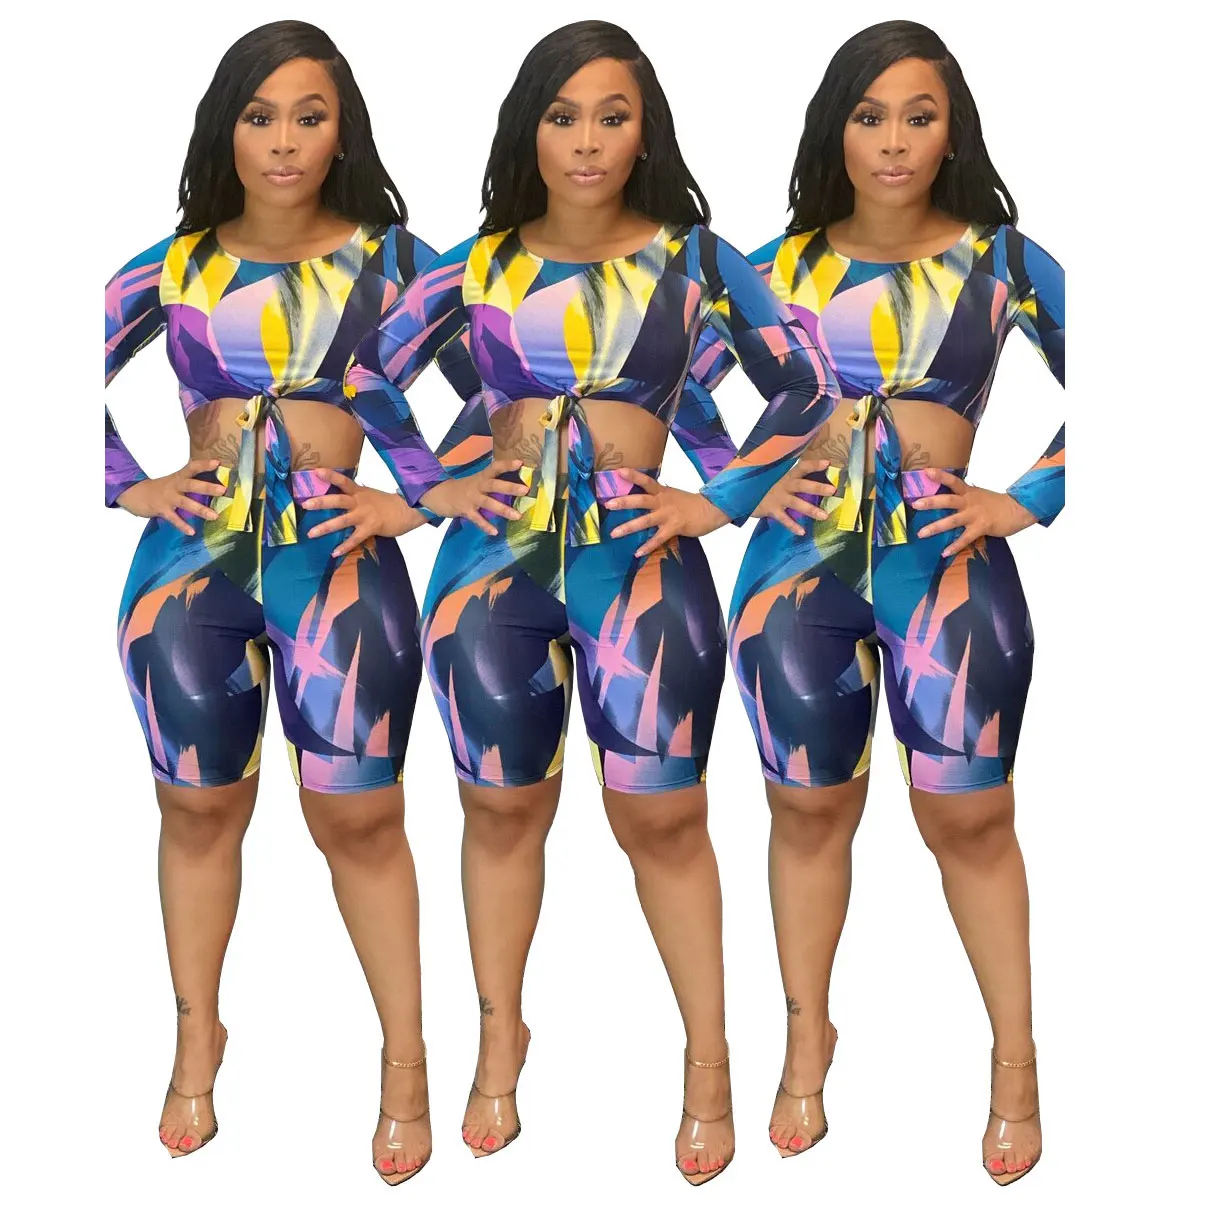 

21215-MX80 printed shorts two piece set women clothing crop top jumpsuits sehe fashion